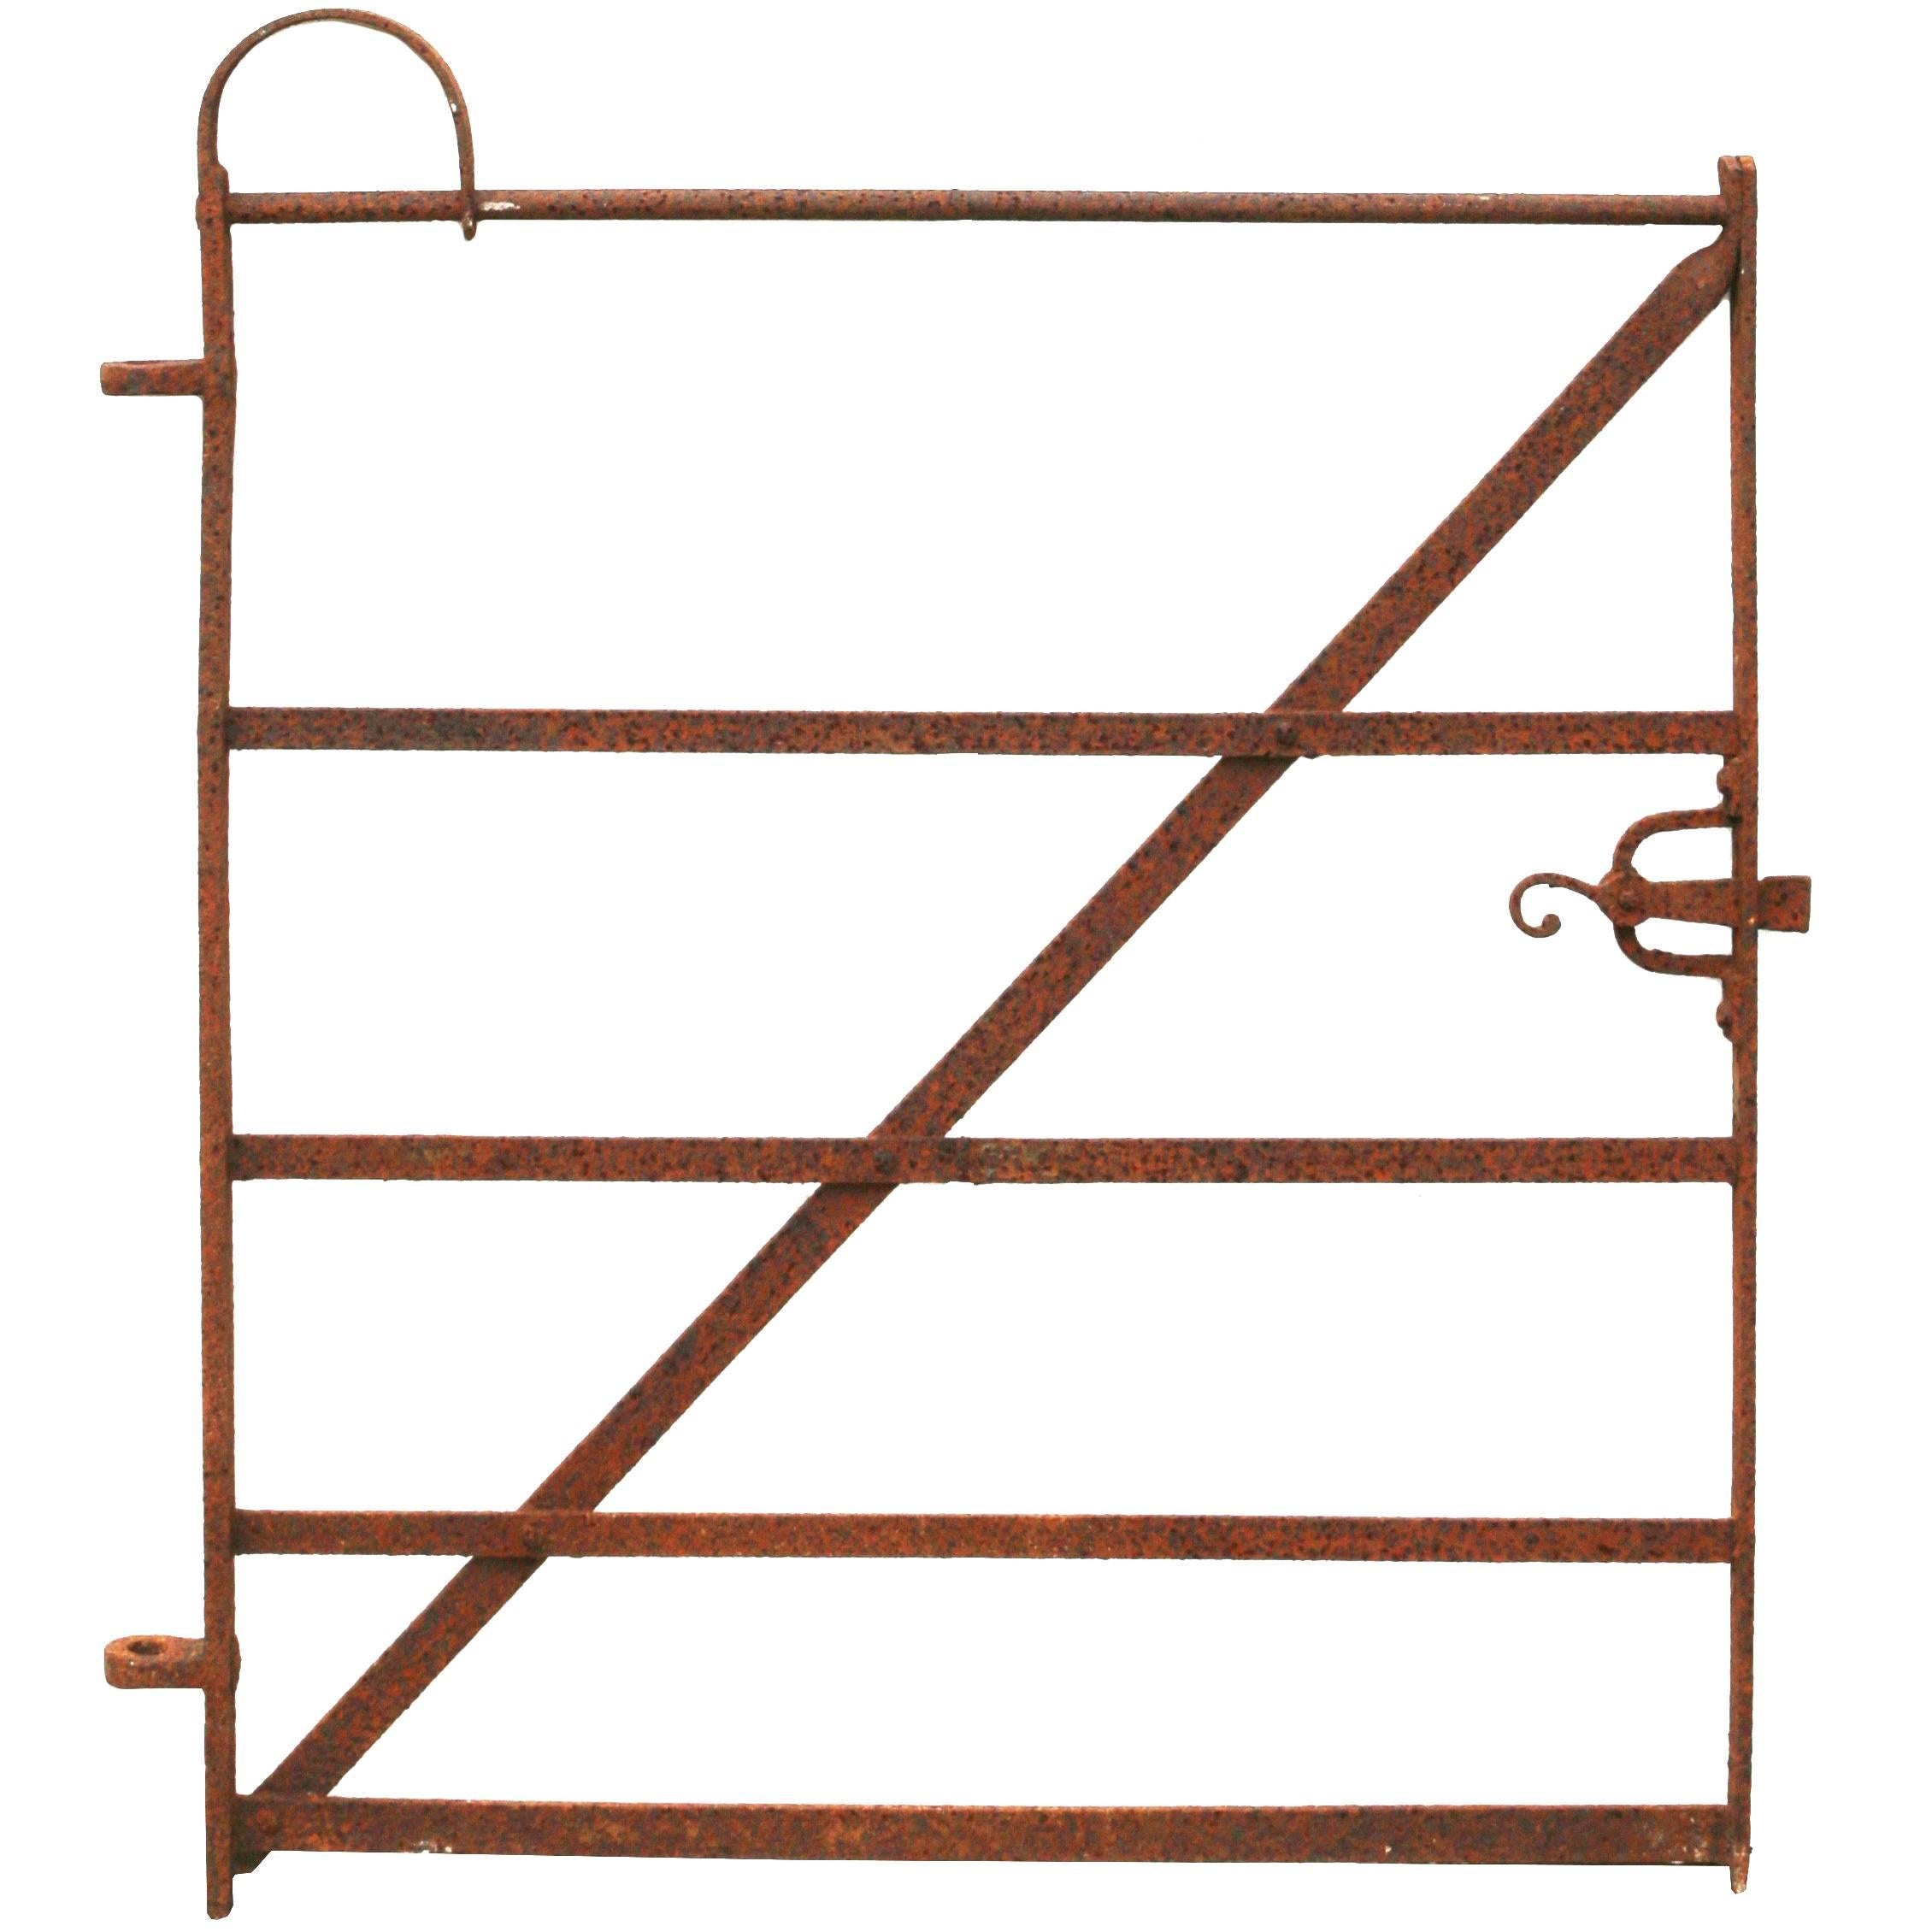 Early 19th Century Wrought Iron Pedestrian Gate